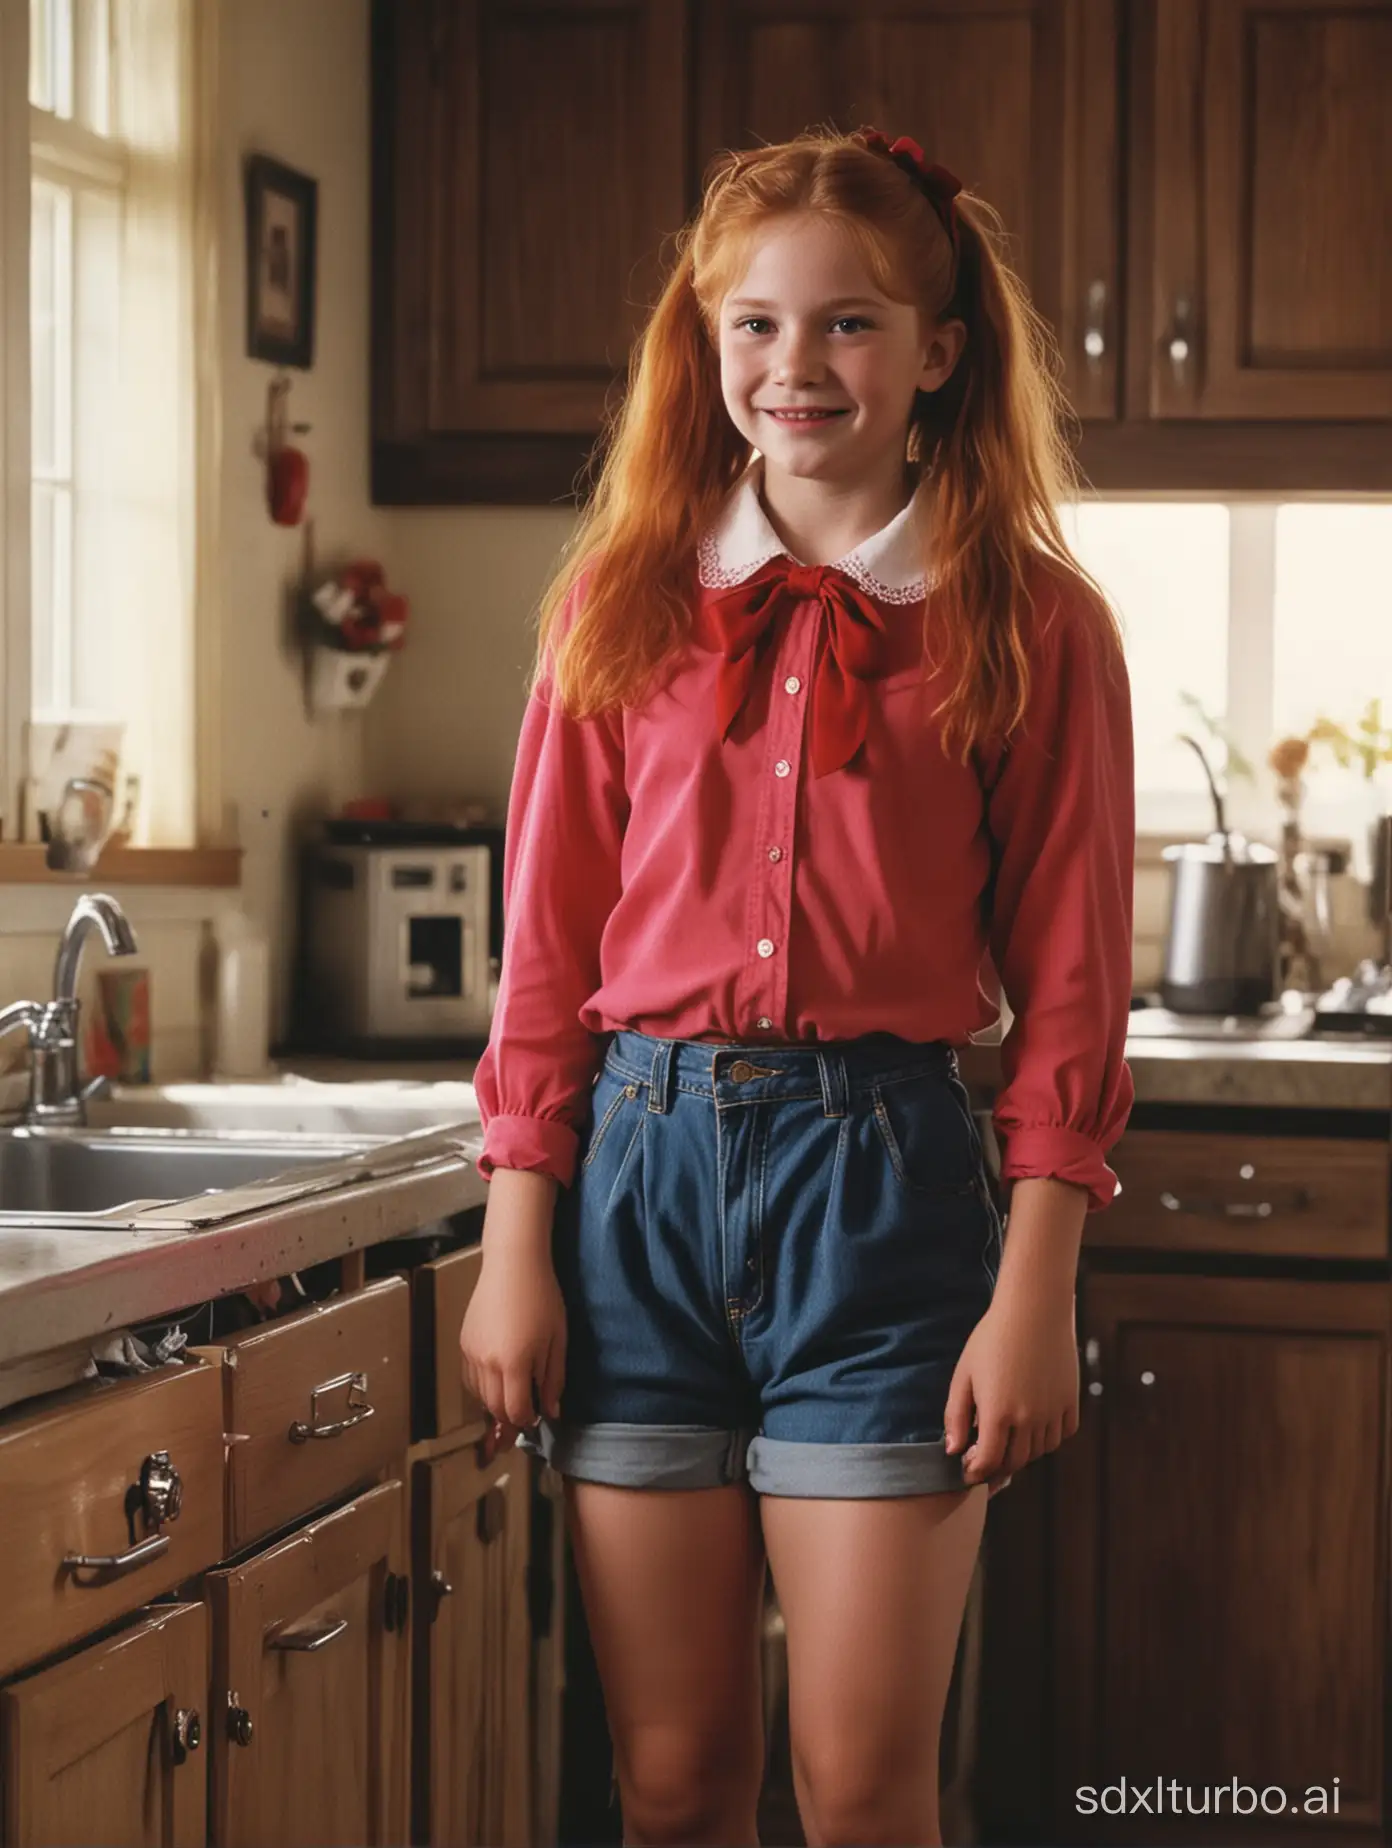 *VHS recording, late 80s thriller with fantasy and horror elements, directed by Paul Verhoeven, main character a middle-school girl, 10 years old, with straight and long red hair, wearing a red bow, wearing a magenta blouse and jorts, smiling happily, standing in kitchen, low lighting, terrifying, VHS-C, granular, unsettling, frightening.*